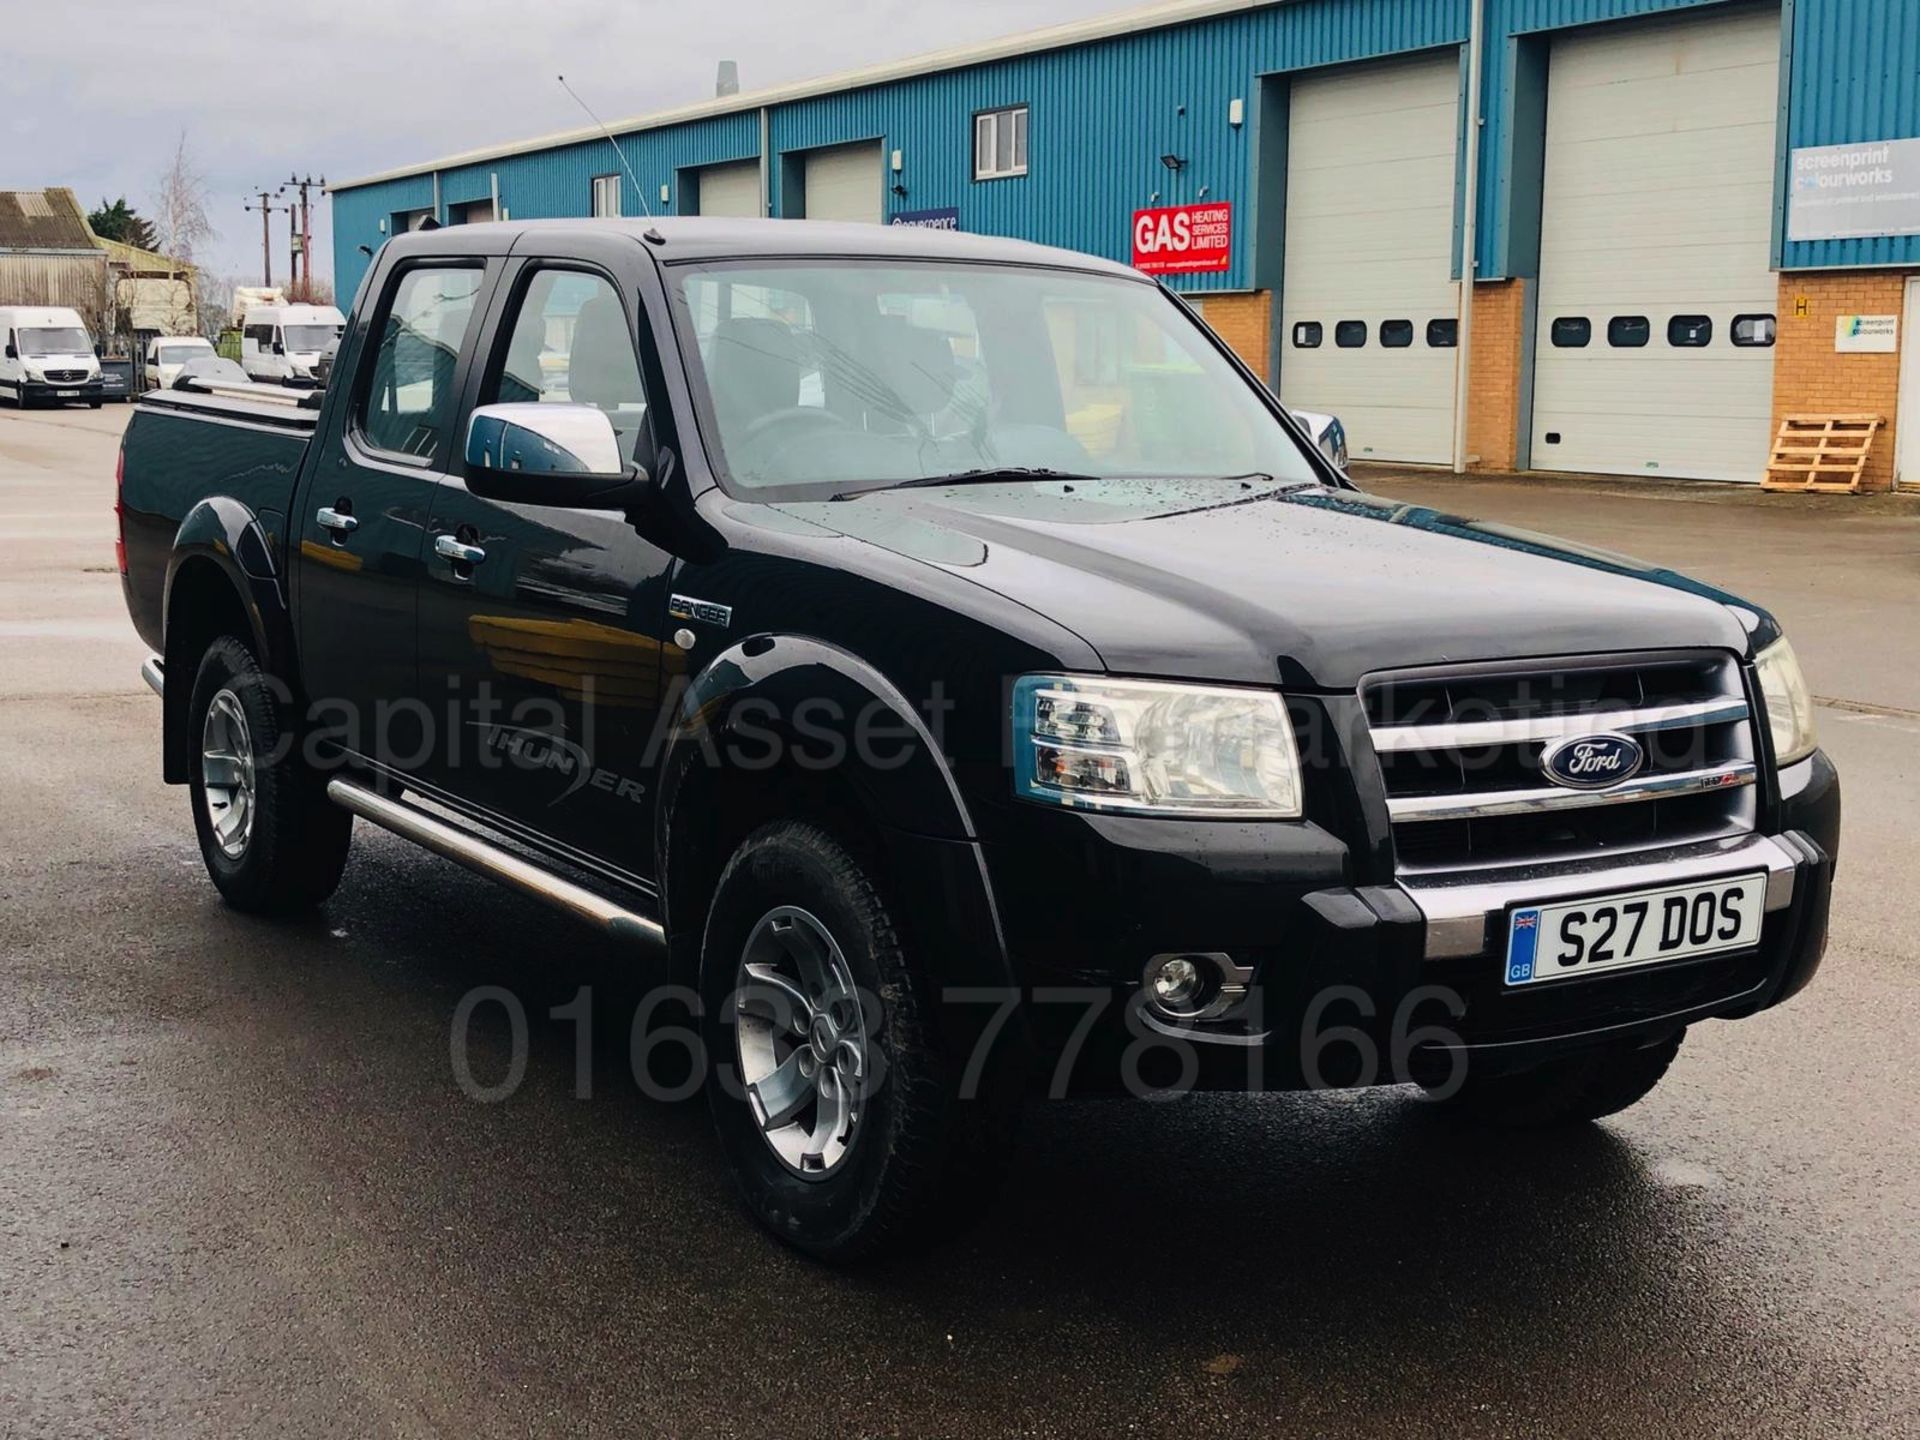 (On Sale) FORD RANGER *THUNDER EDITION* D/CAB PICK-UP (2009) '3.0 TDCI - 156 BHP - AUTO' *LOW MILES*